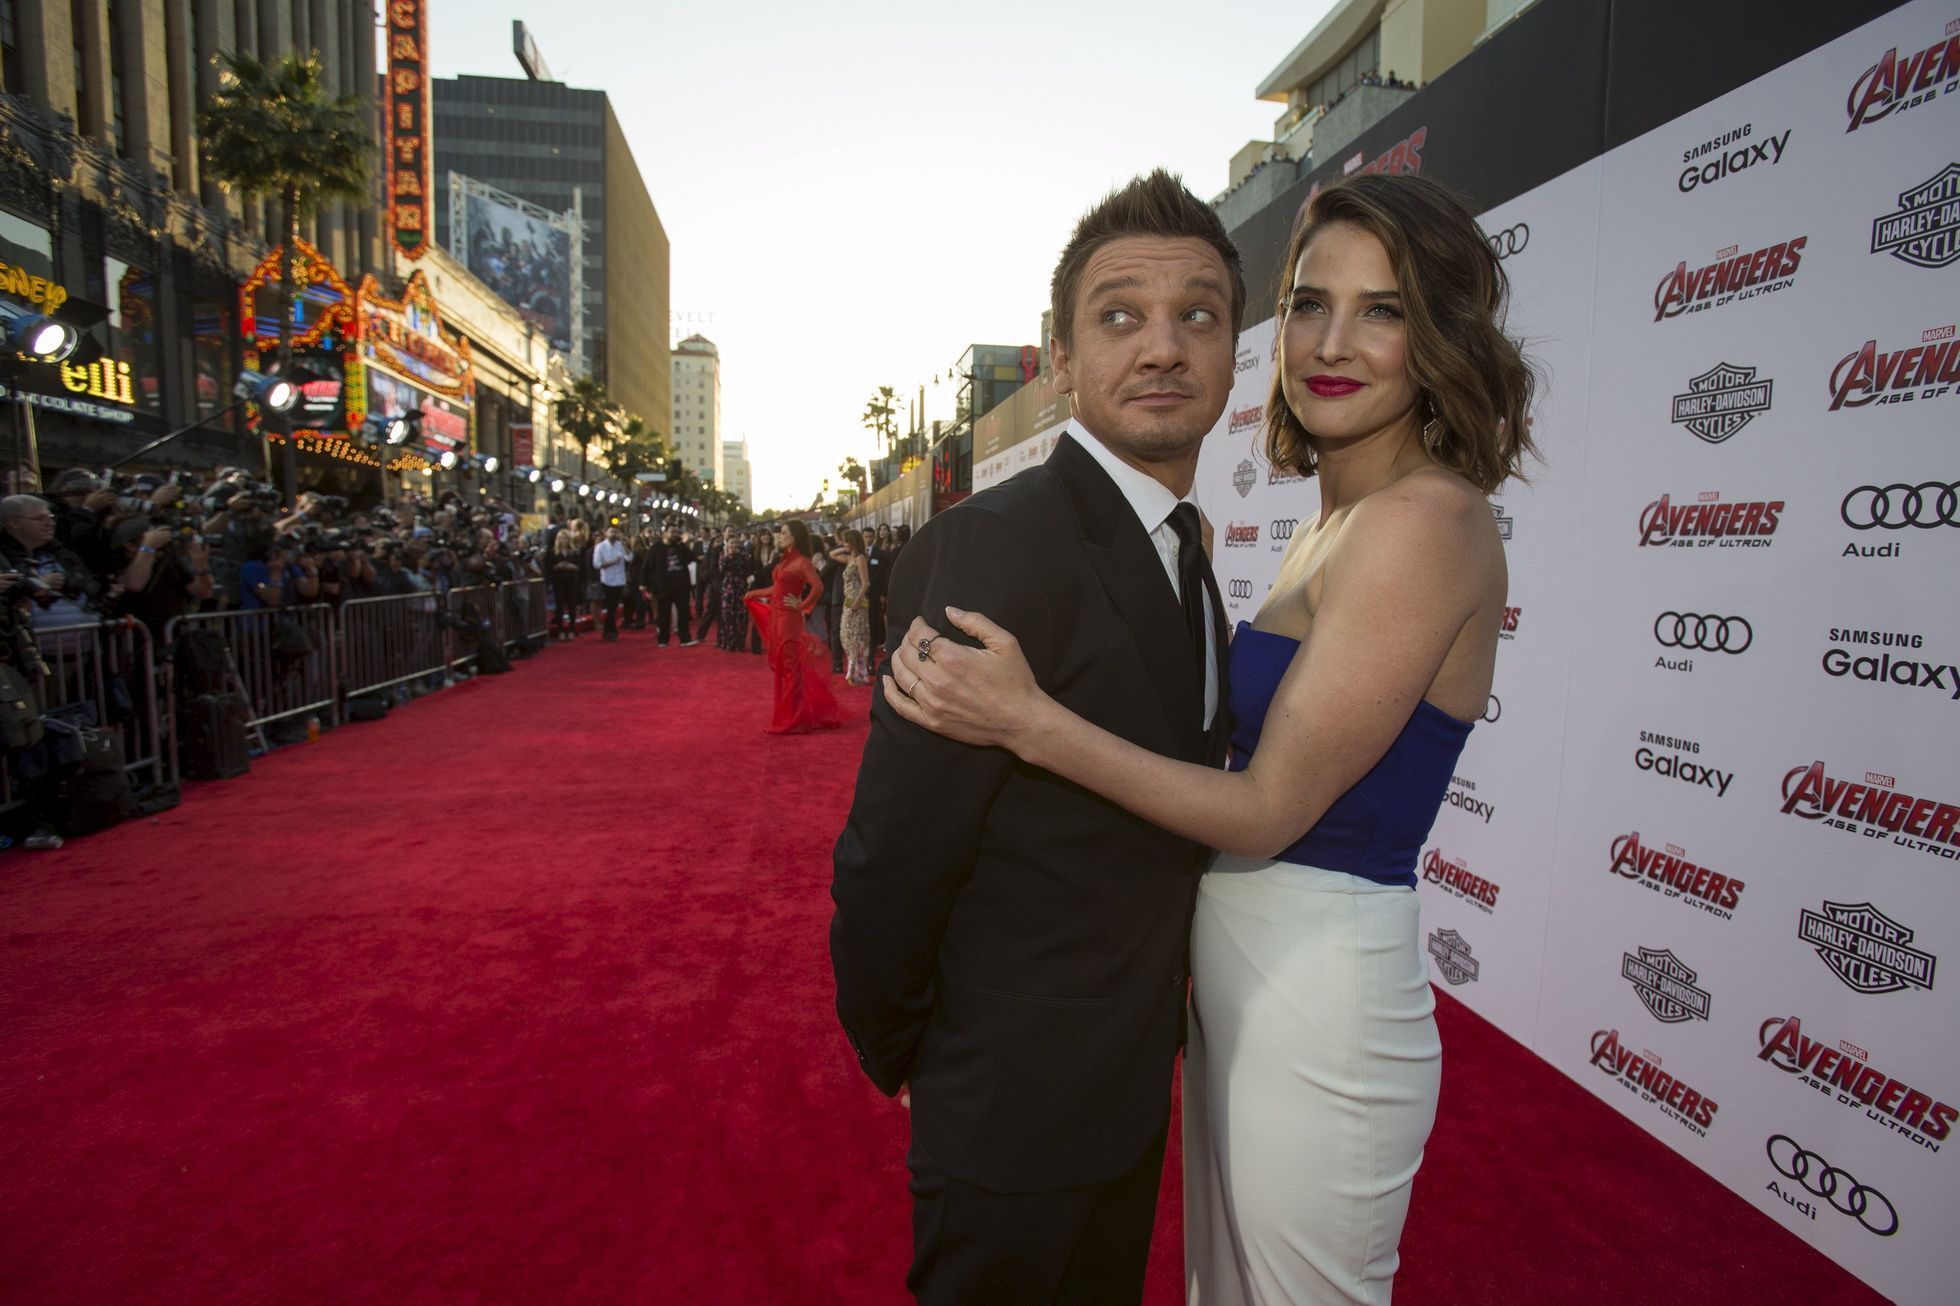 Jeremy Renner and Cobie Smulders